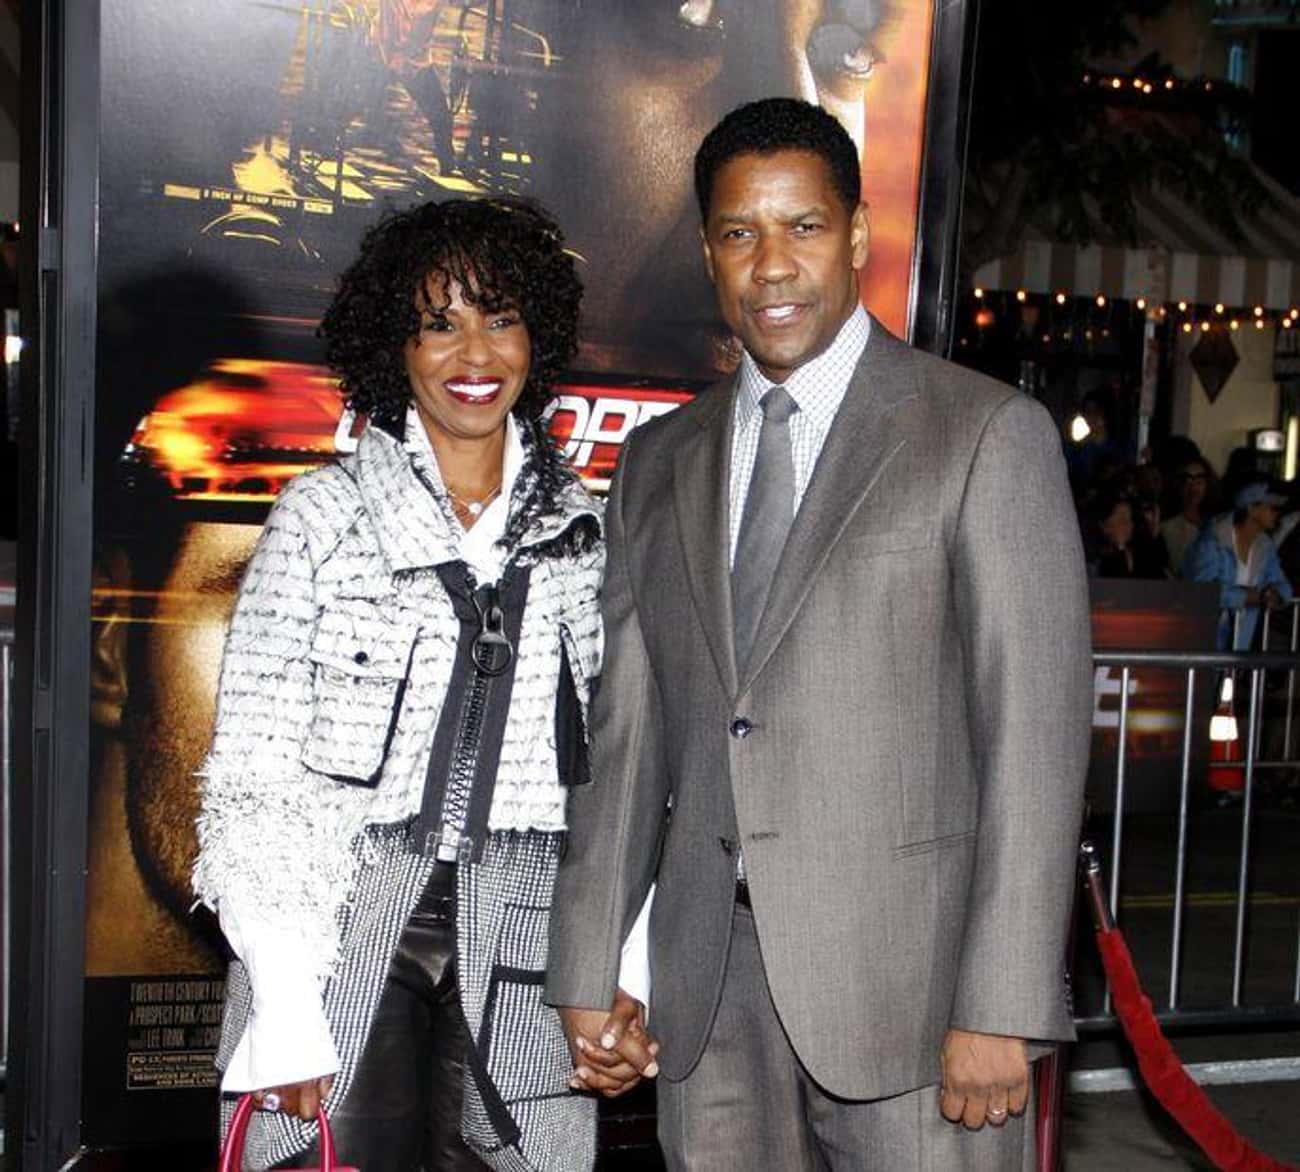 Denzel Washington's Wife, Pauletta, Paid On Their First Date Because He Didn’t Have Enough Money